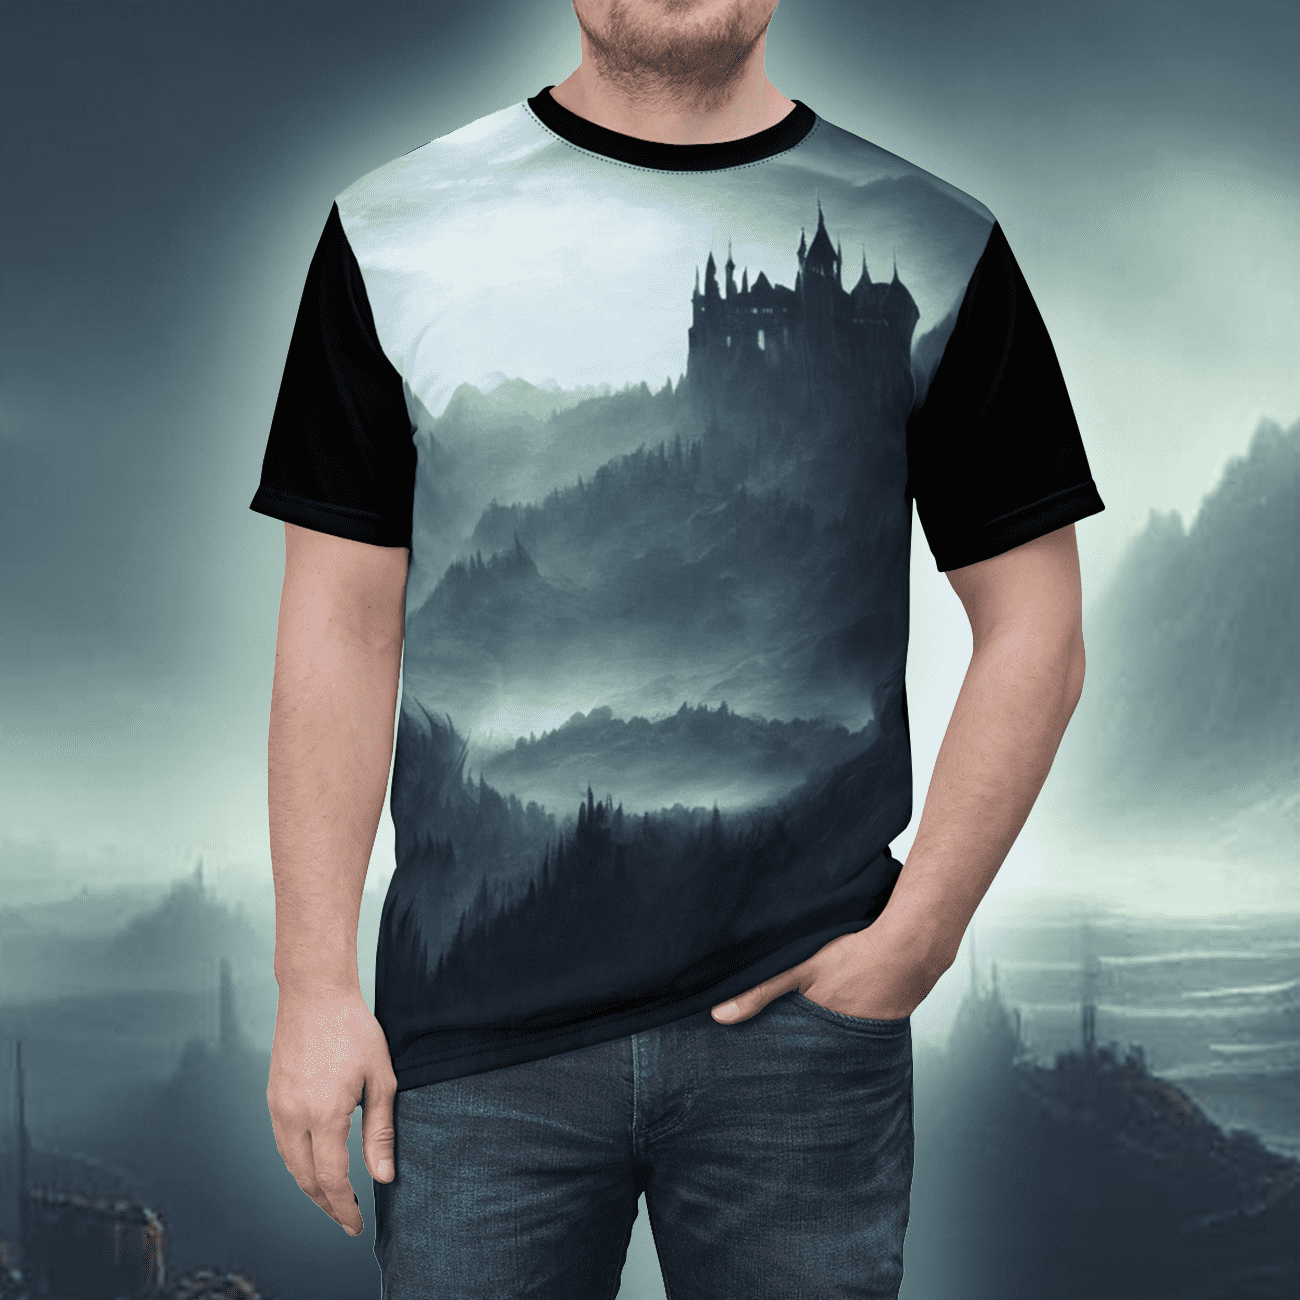 Gothic horror art t-shirt of a classic Transylvania style vampire castle from The Broken Realm.